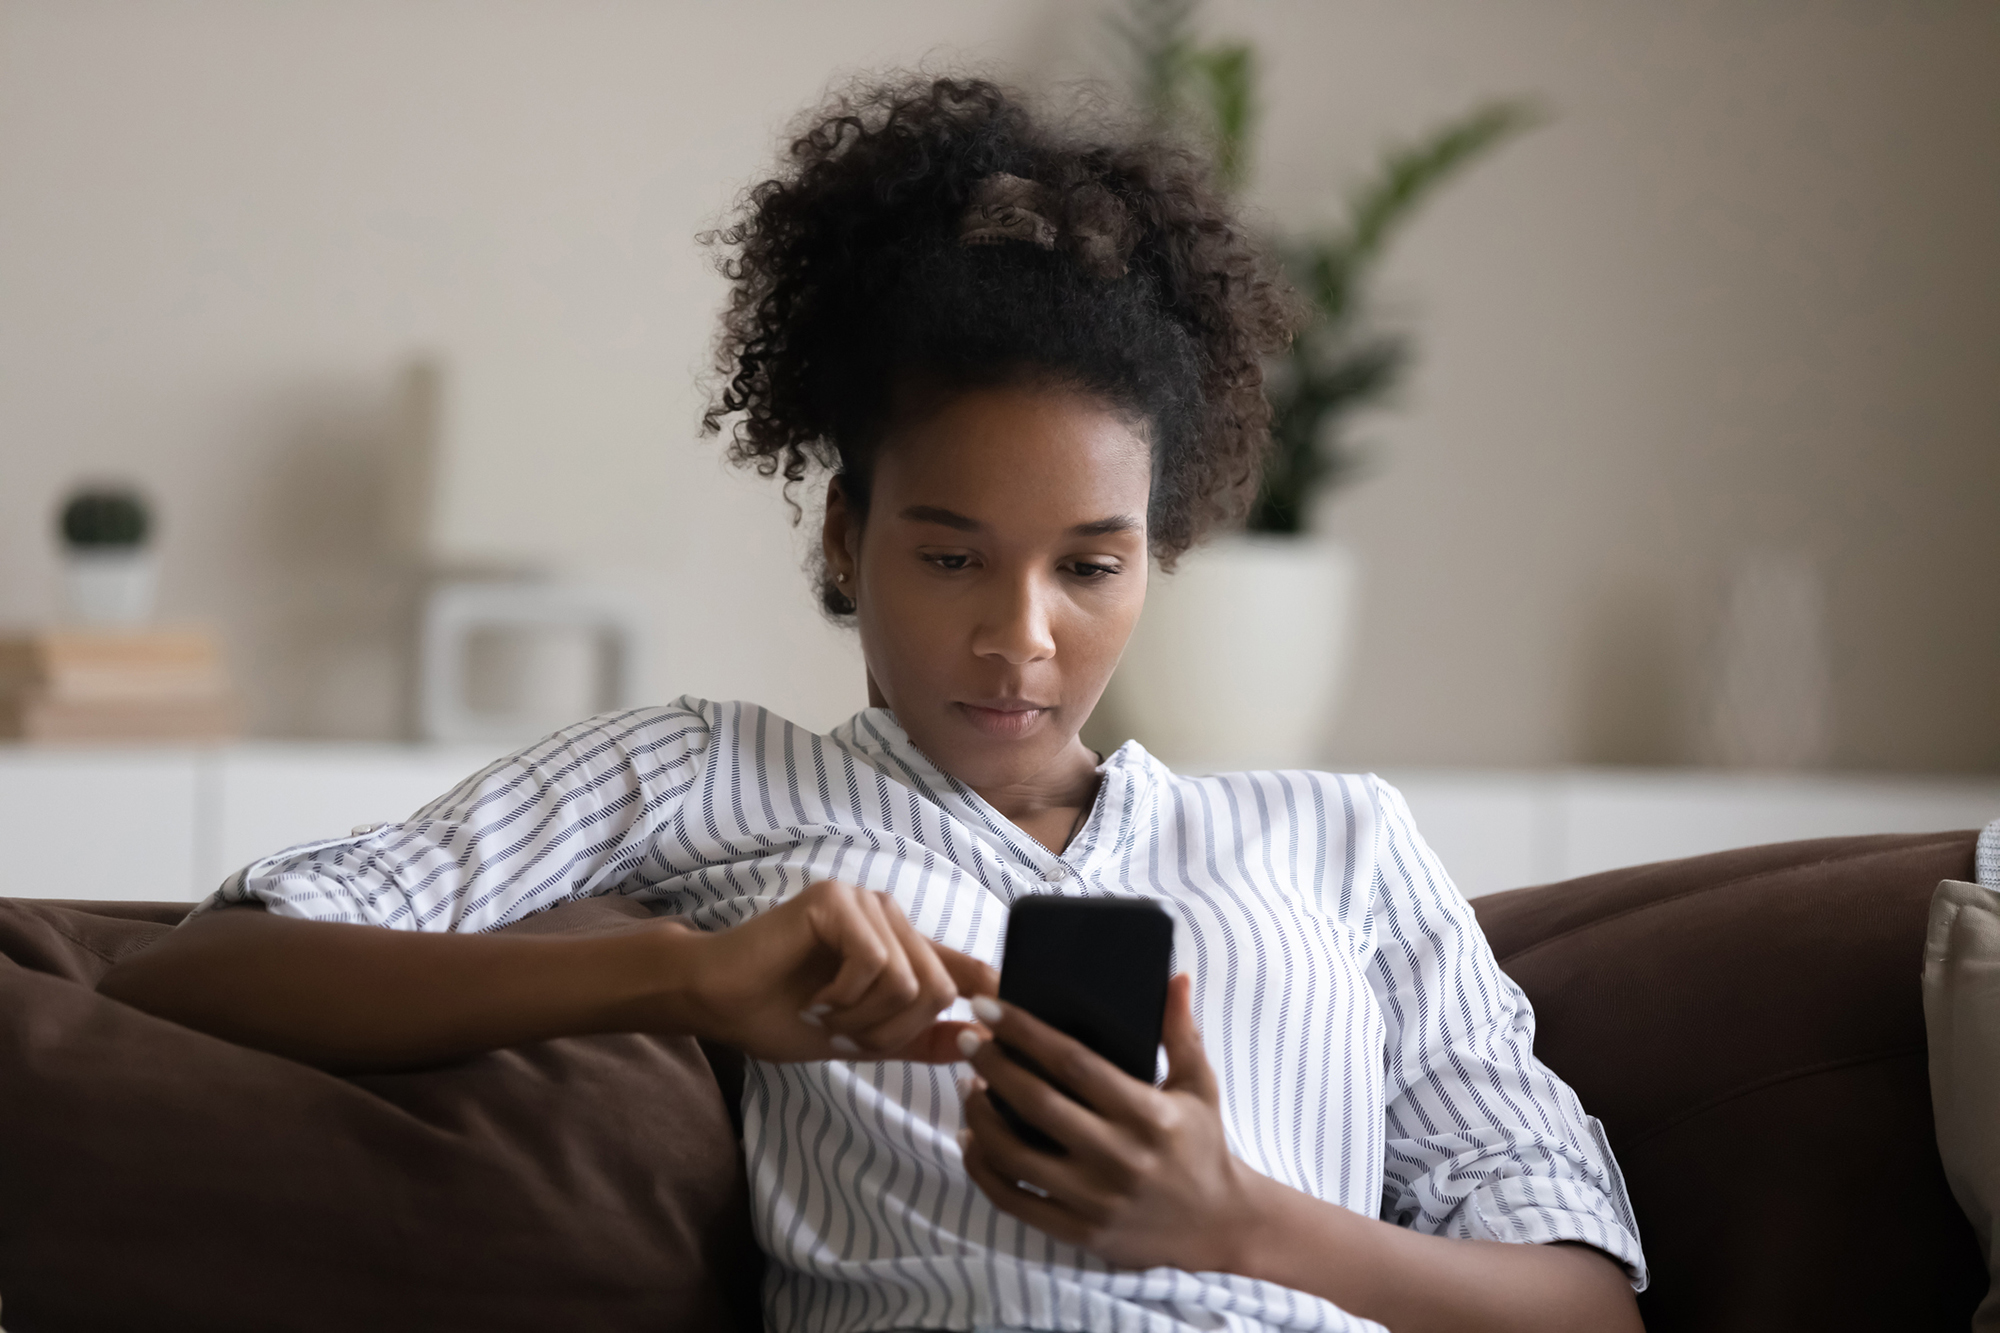 African American person using a smartphone on a couch.